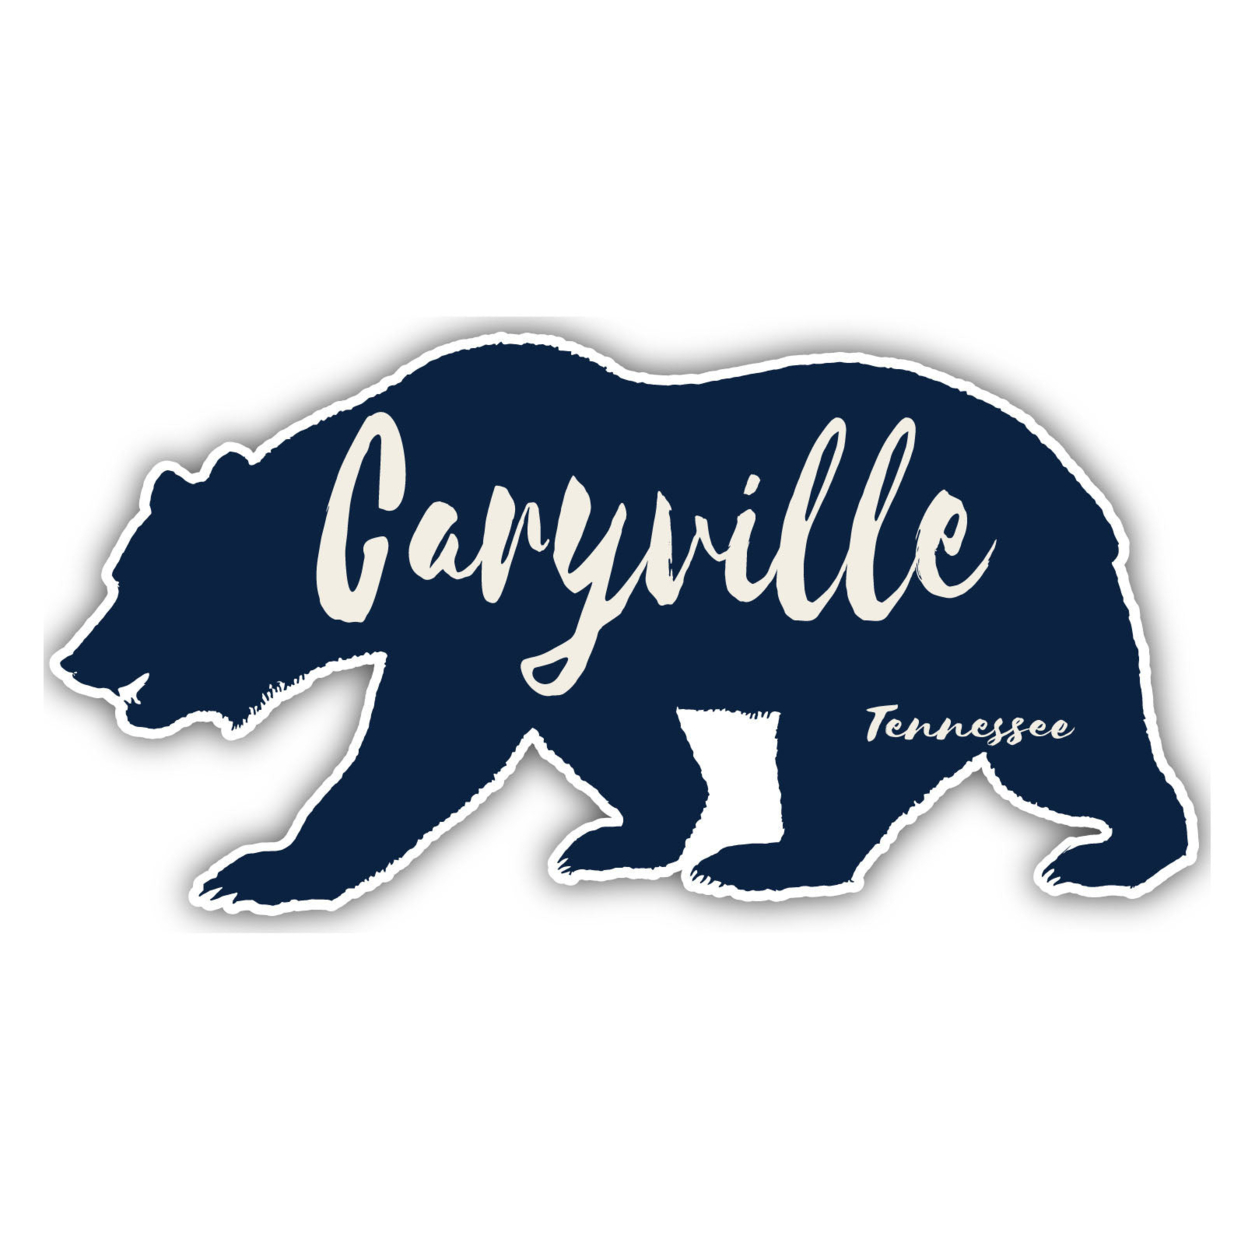 Caryville Tennessee Souvenir Decorative Stickers (Choose Theme And Size) - Single Unit, 12-Inch, Tent